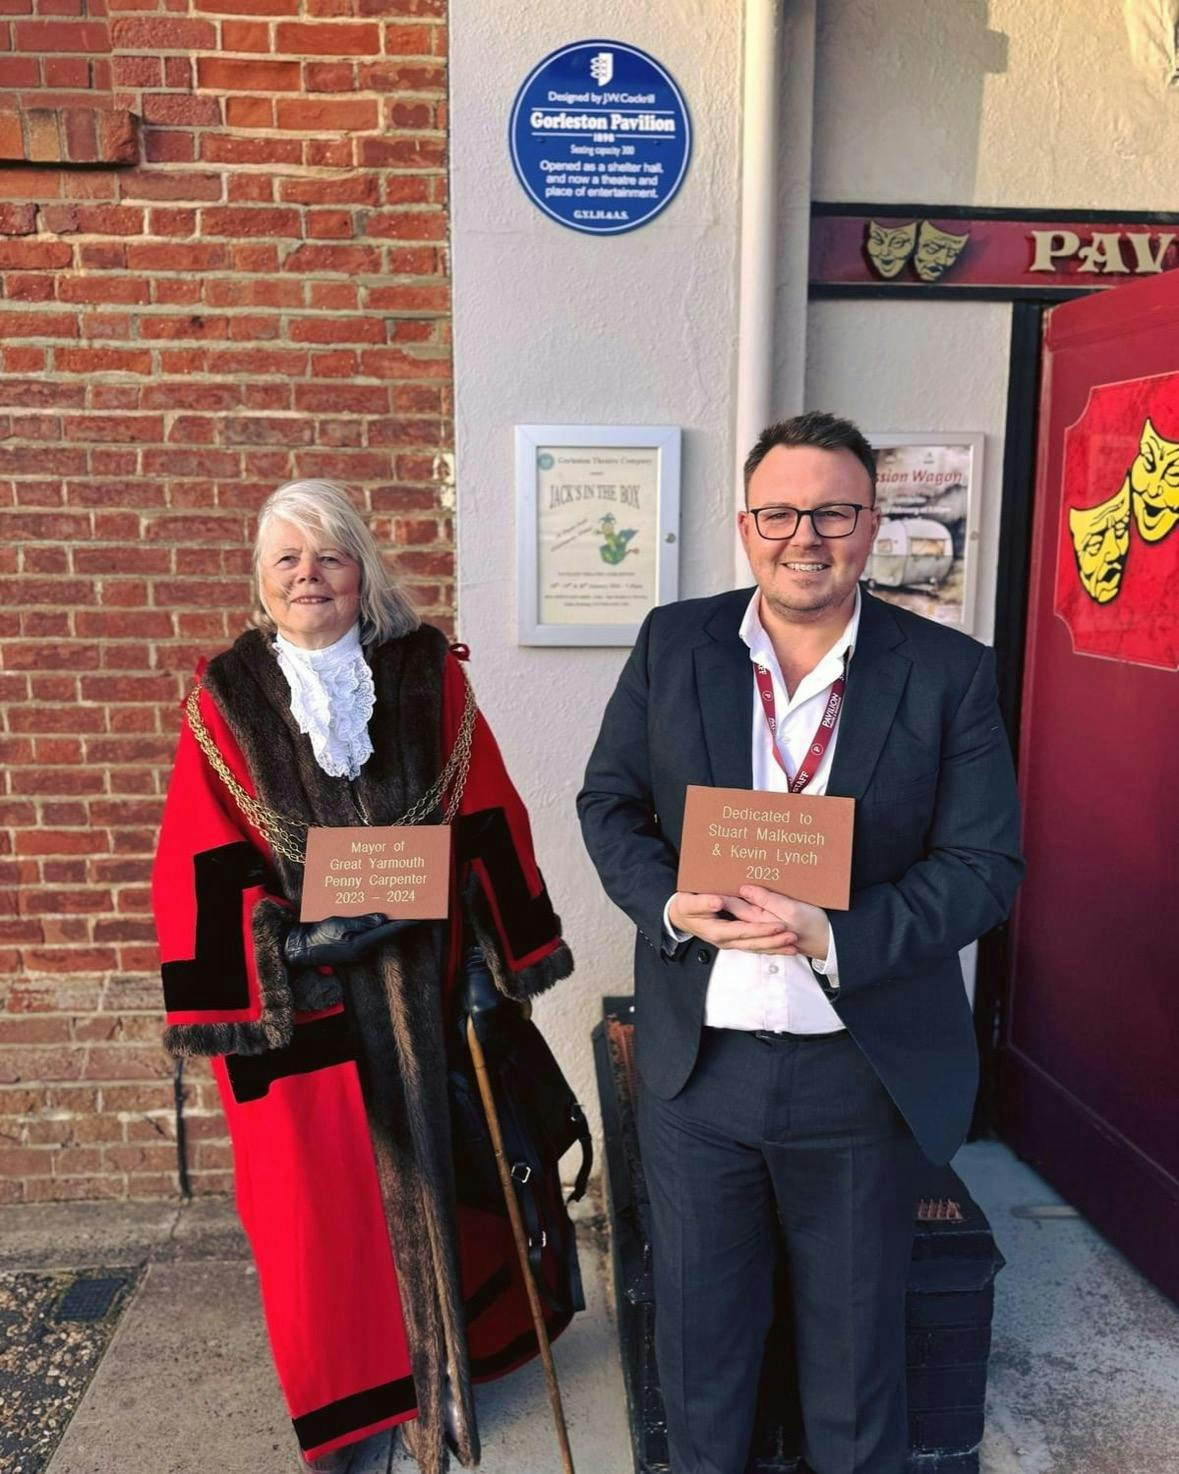 The Mayor of Great Yarmouth Councillor Penny Carpenter and Chair of Trustees Alex Youngs